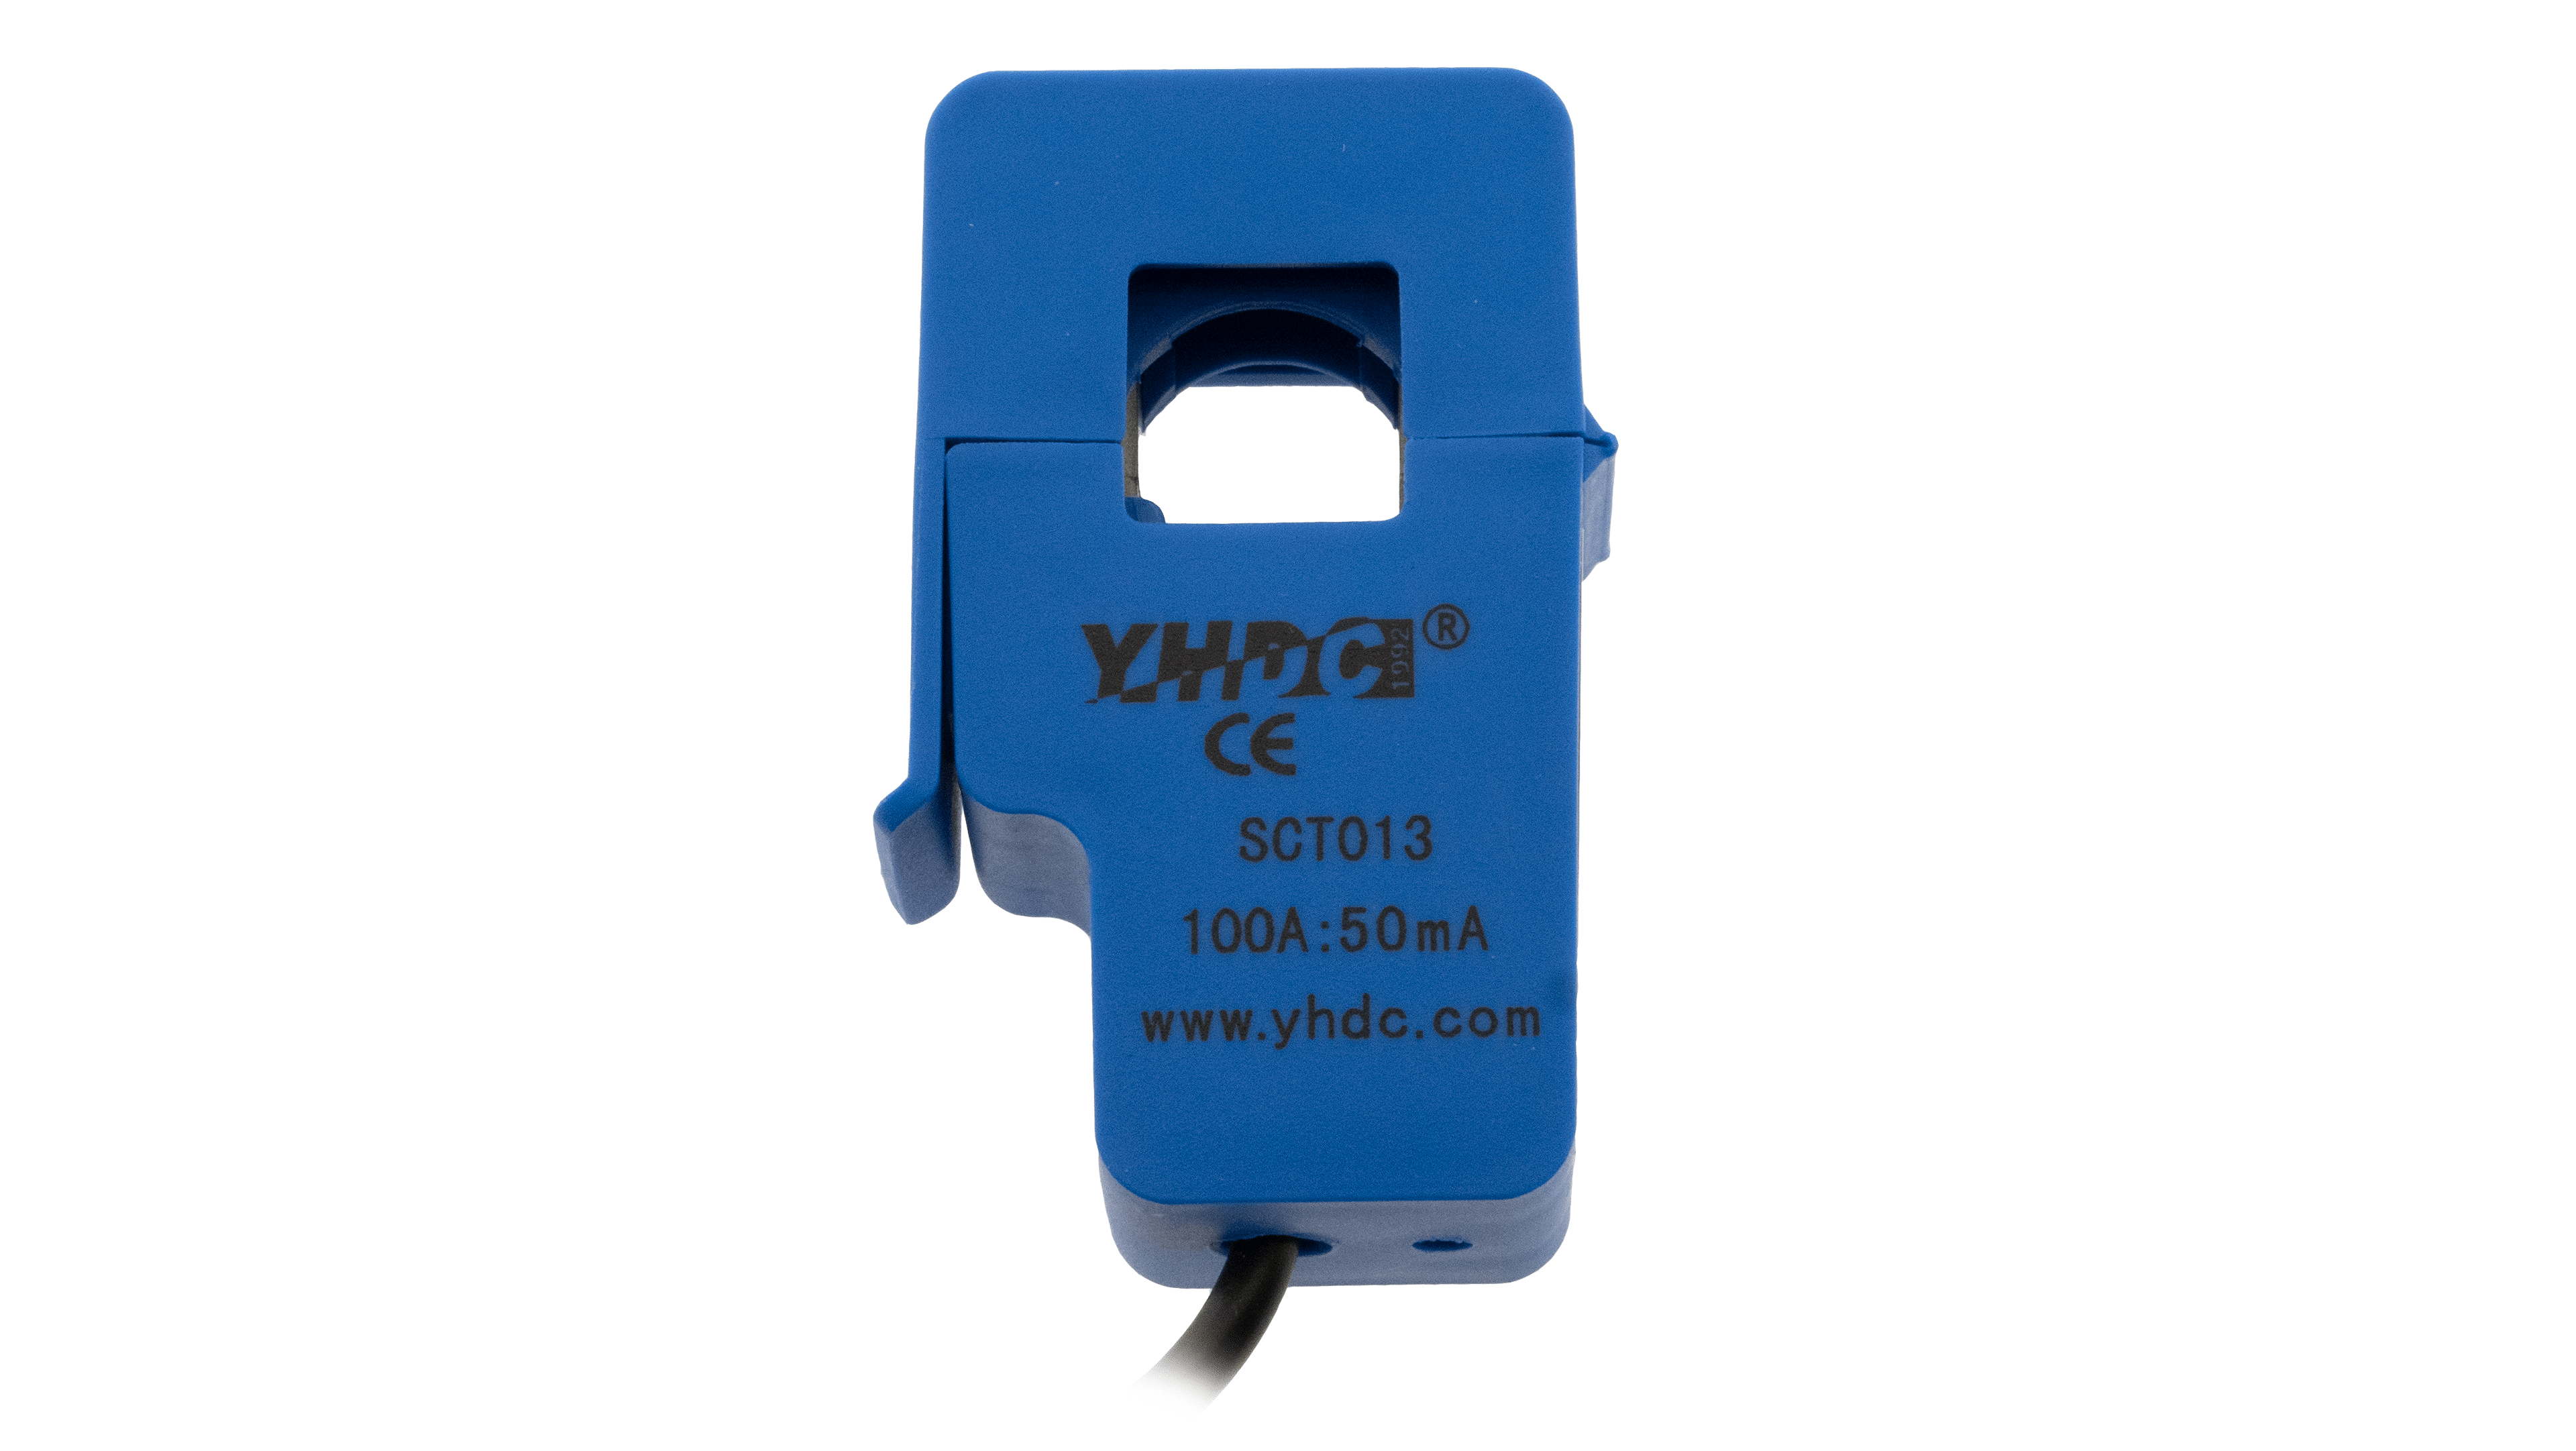 Current Transformer 100A:50mA for MultiPlus-II